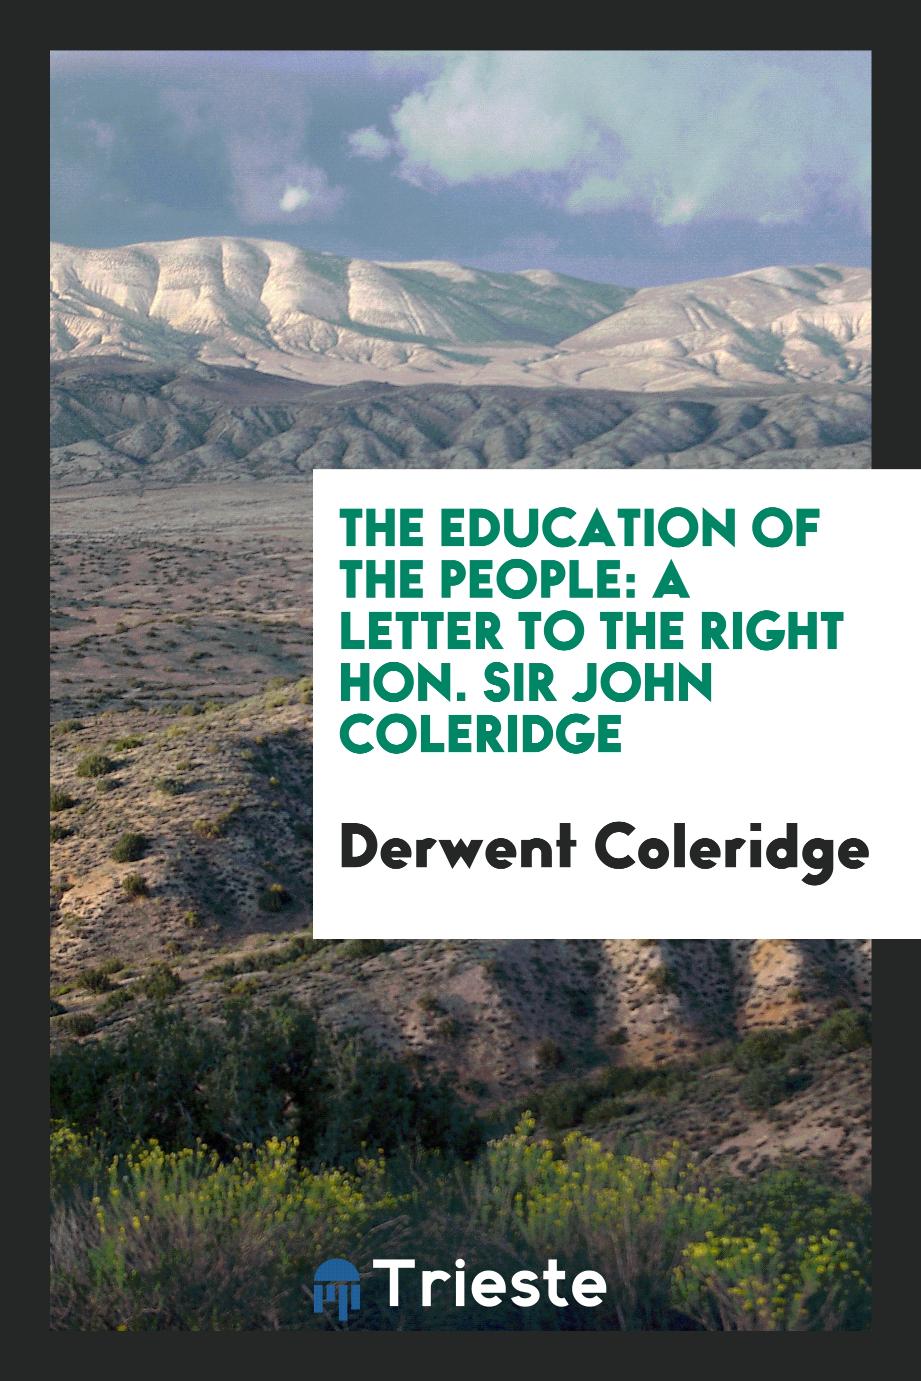 The Education of the People: A Letter to the Right Hon. Sir John Coleridge